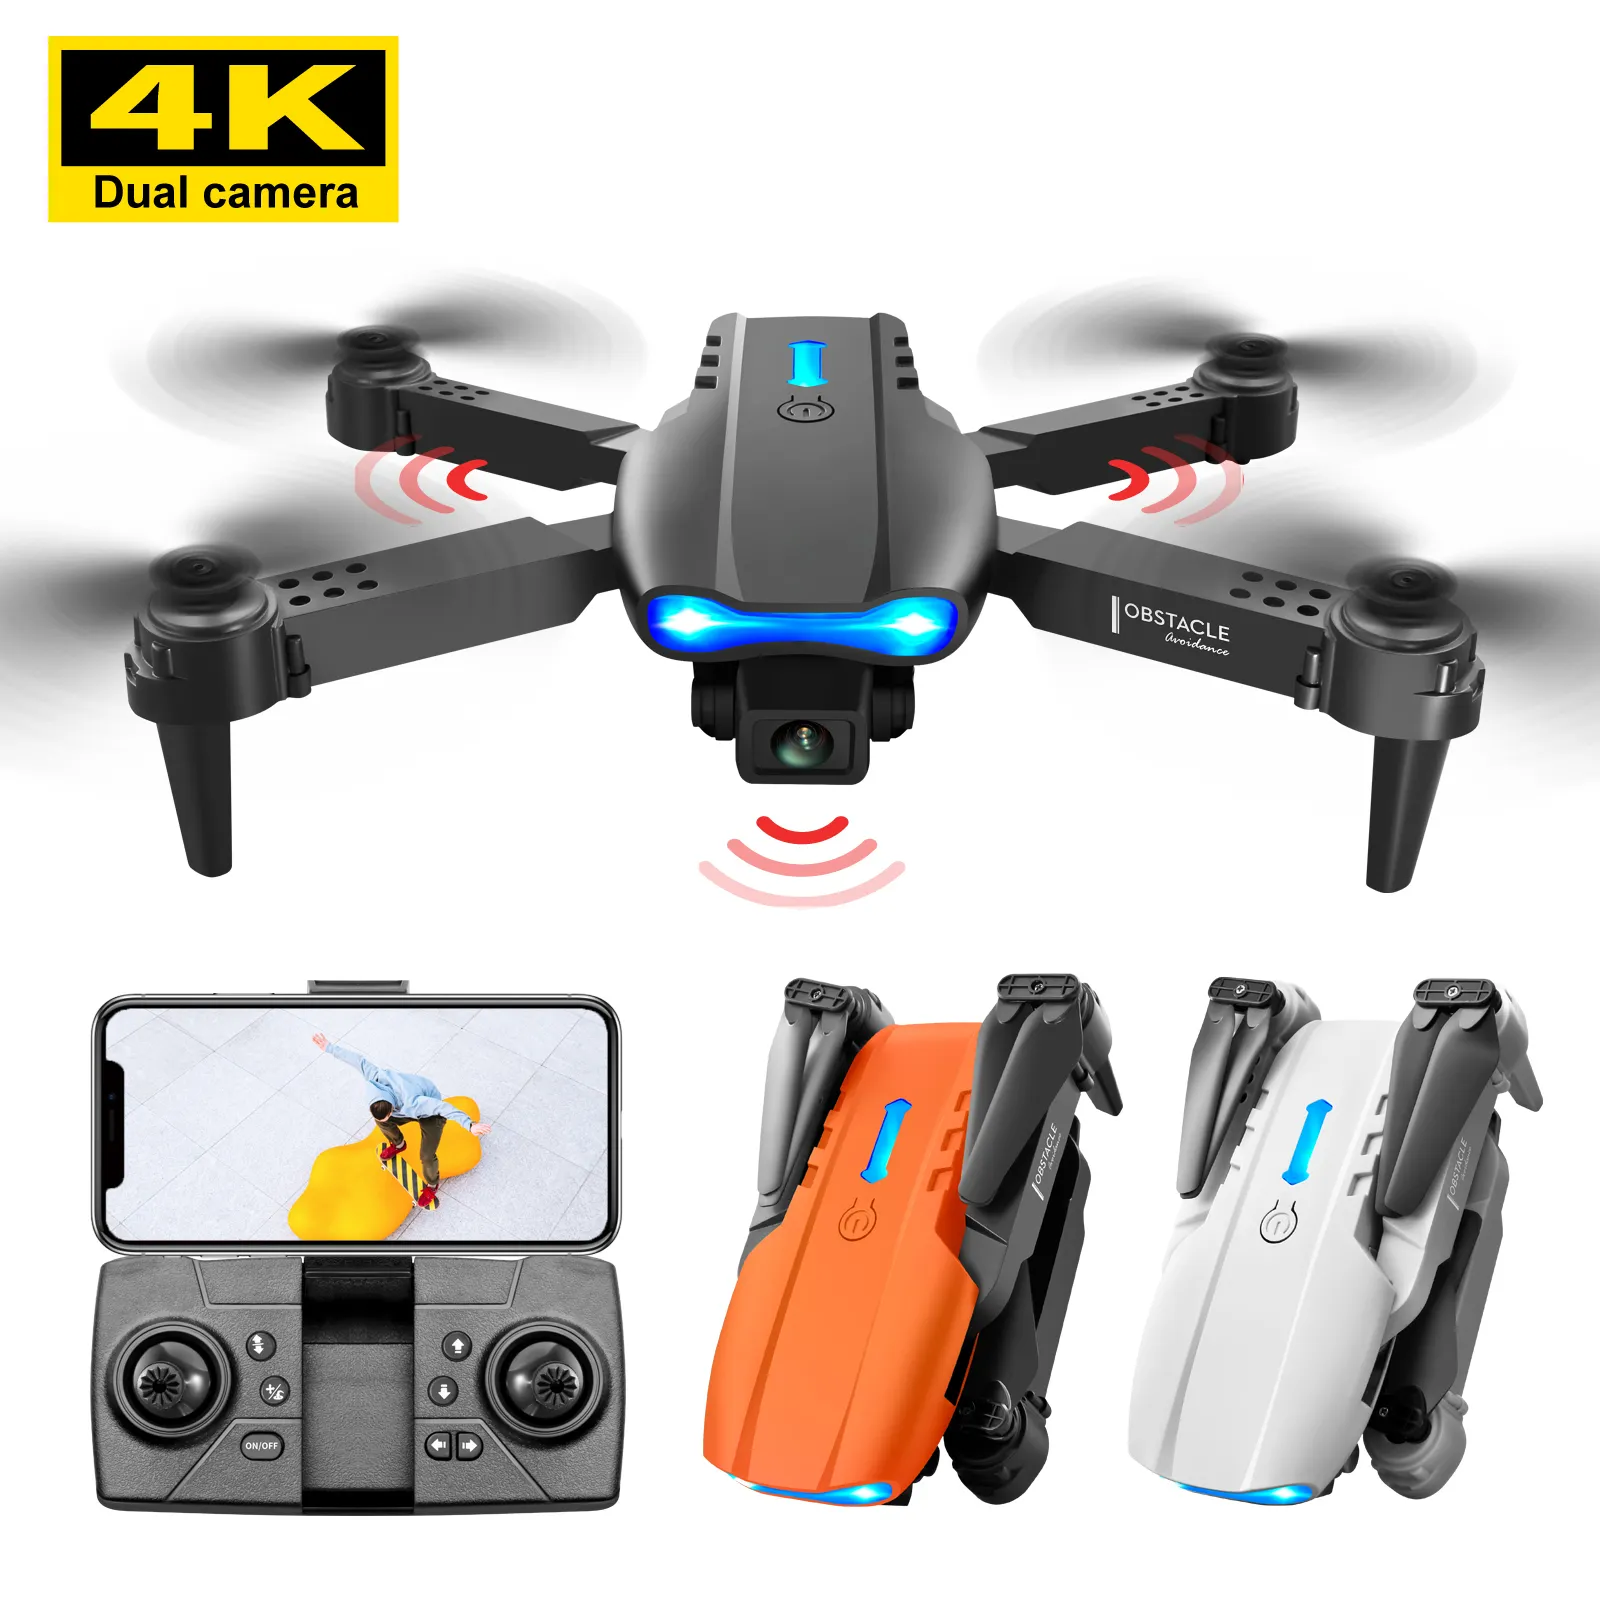 E99 MAX K3 Pro Drone Professional Quadcopter Obstacle Avoidance Drones RC Helicopters 4K Dual Camera Remote Control Toys